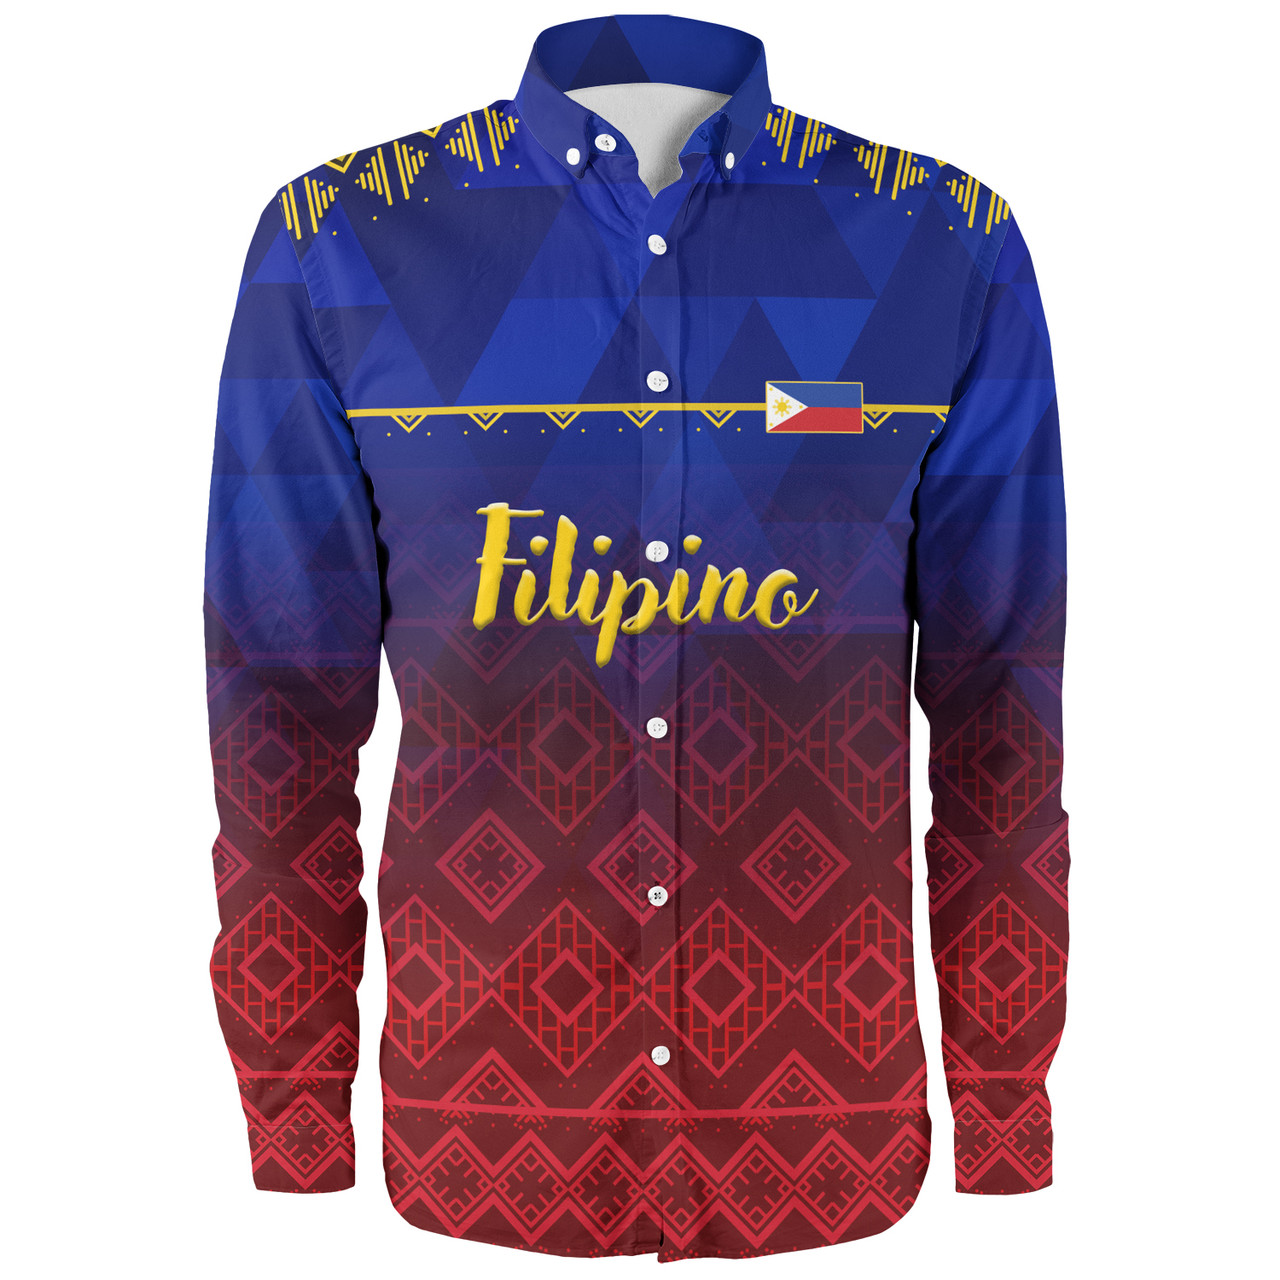 Philippines Filipinos Long Sleeve Shirt Lowpolly Pattern with Polynesian Motif